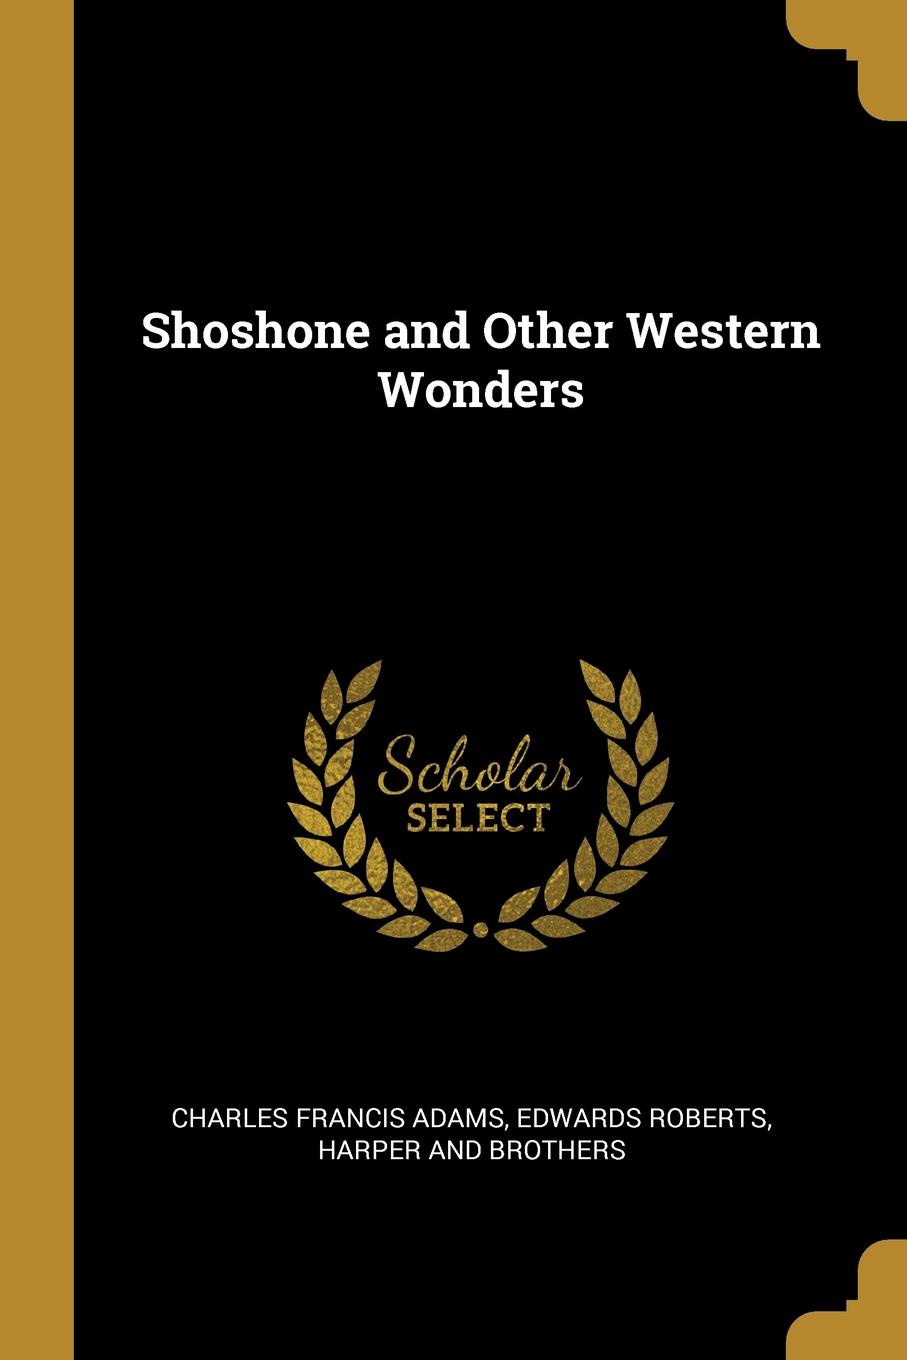 Shoshone and Other Western Wonders